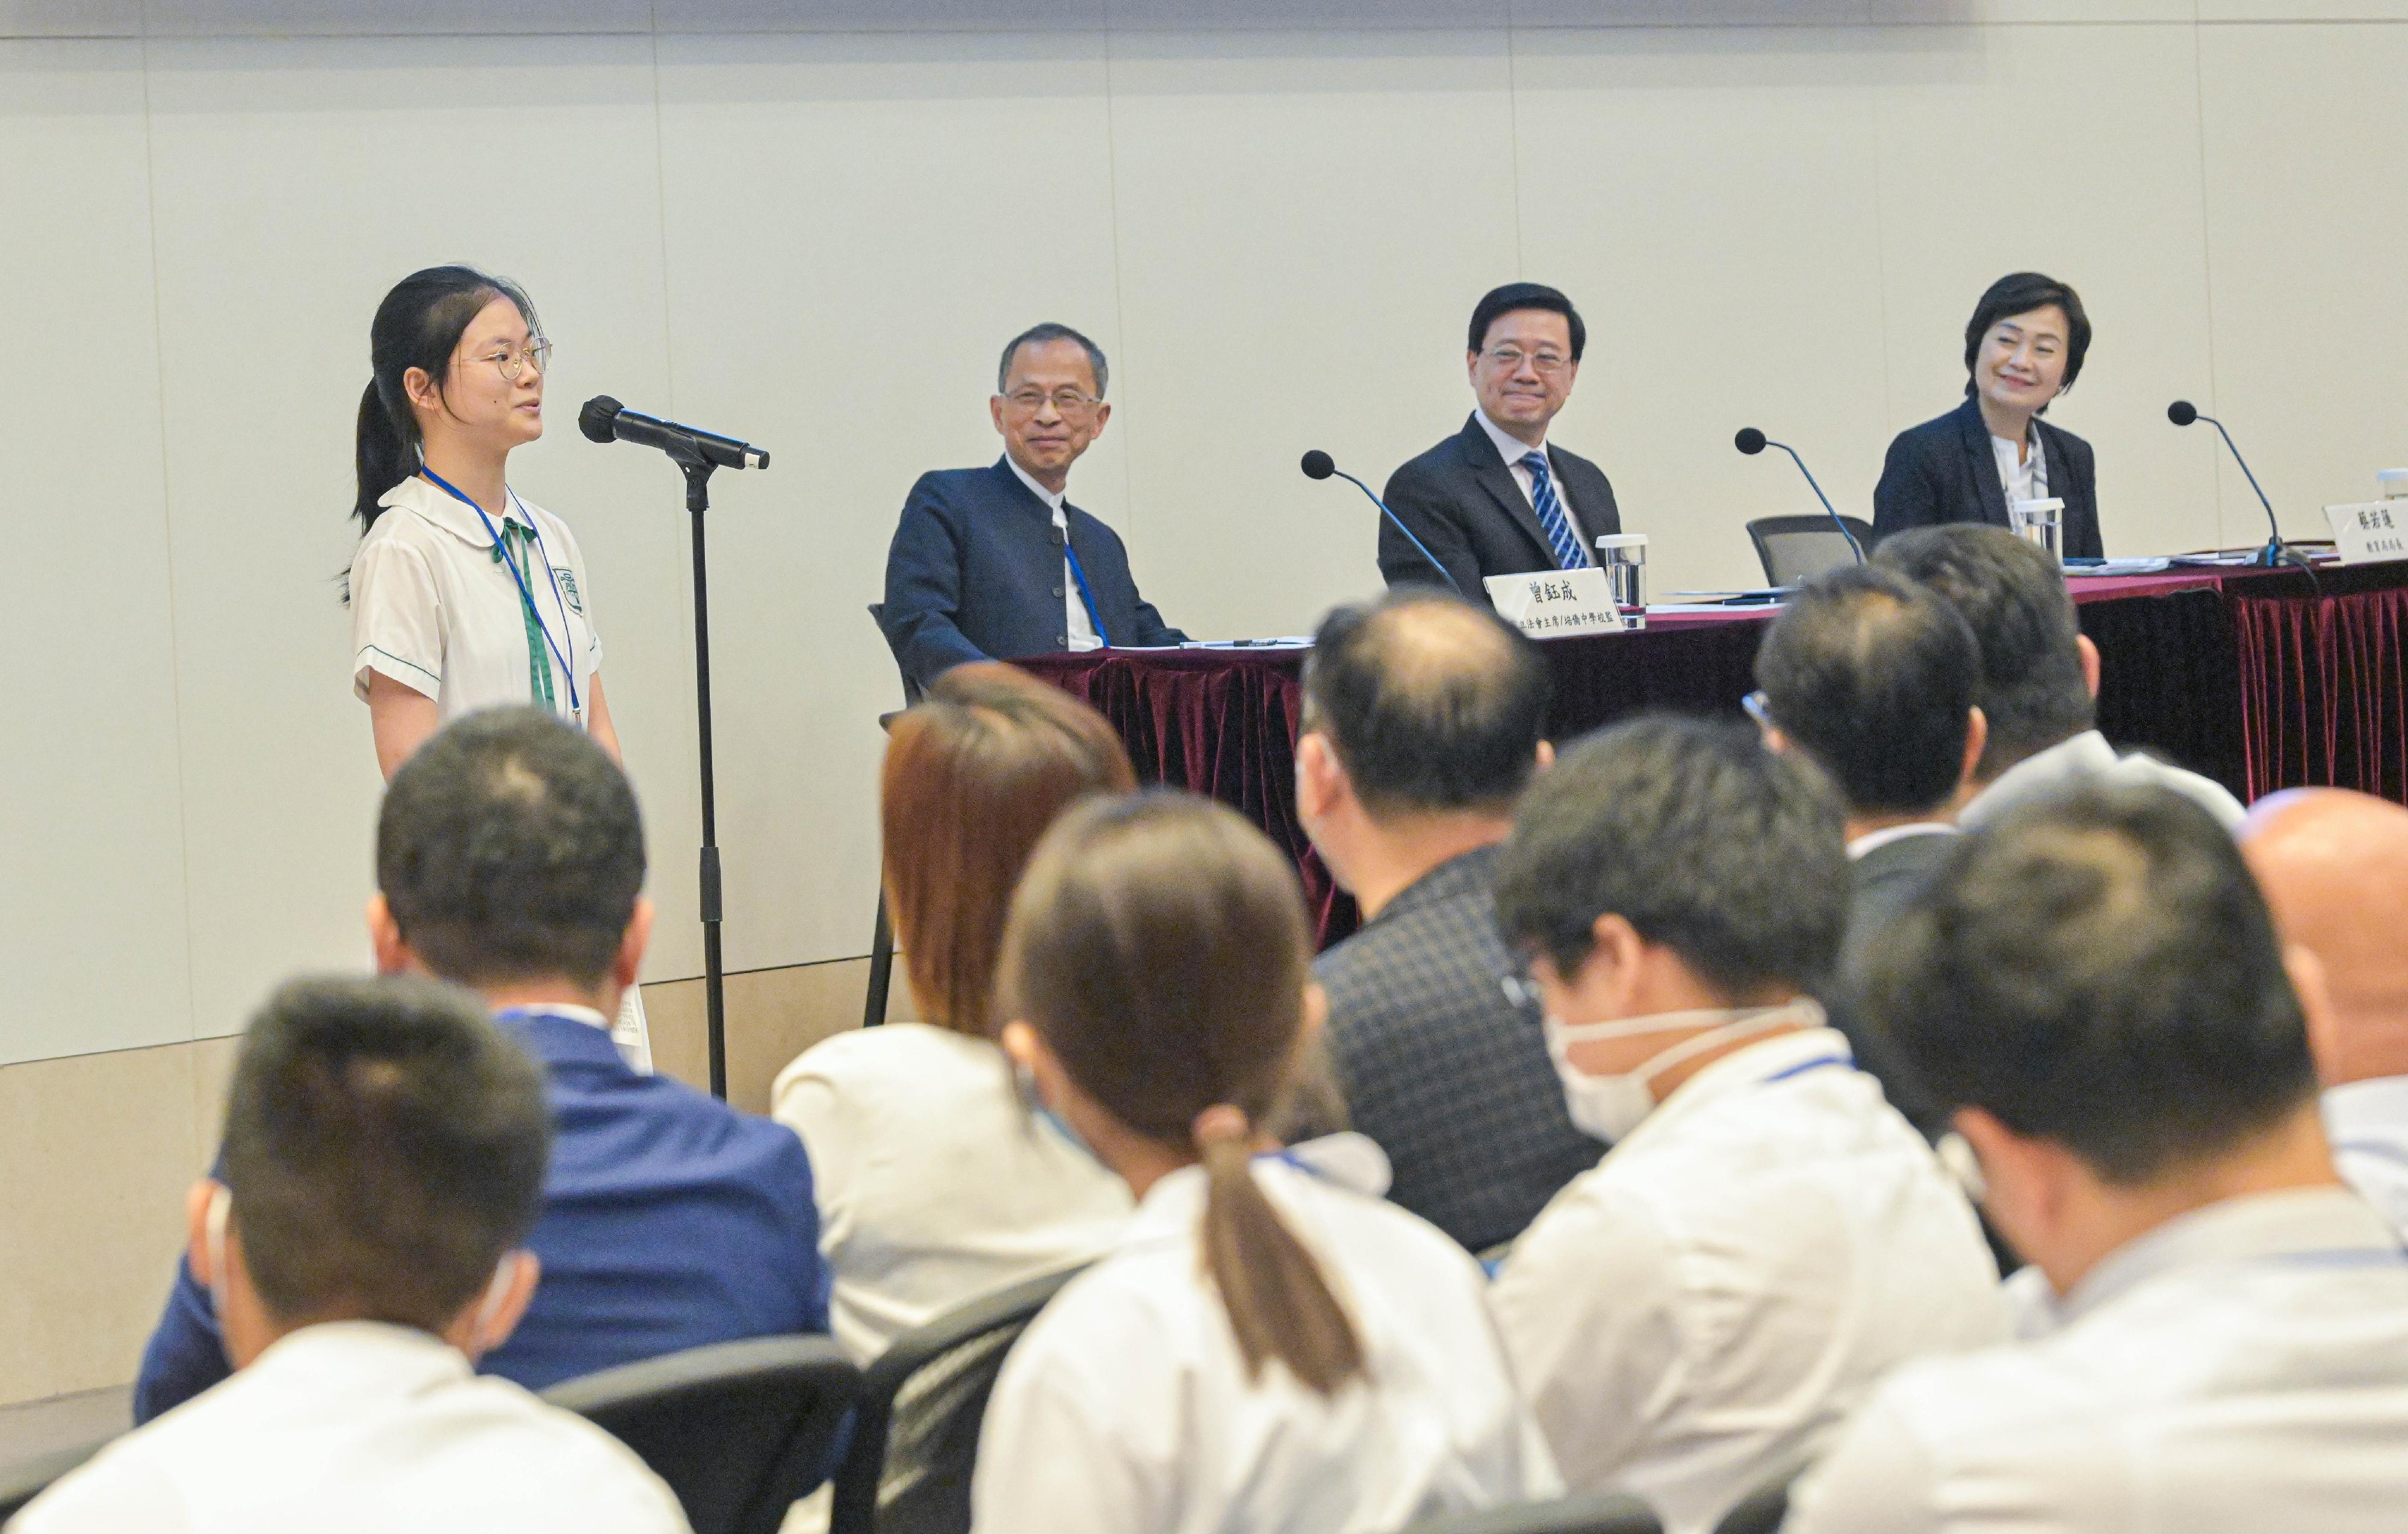 The Government of the Hong Kong Special Administrative Region today (August 11) held a sharing session on the "Important spirit of President Xi Jinping's reply letter to Hong Kong students" at the Central Government Offices. Photo shows the Chief Executive, Mr John Lee (second right); the Secretary for Education, Dr Choi Yuk-lin (first right); and the supervisor of Pui Kiu Middle School, Mr Jasper Tsang (second left), listening to the sharing by a student of Pui Kiu Middle School.